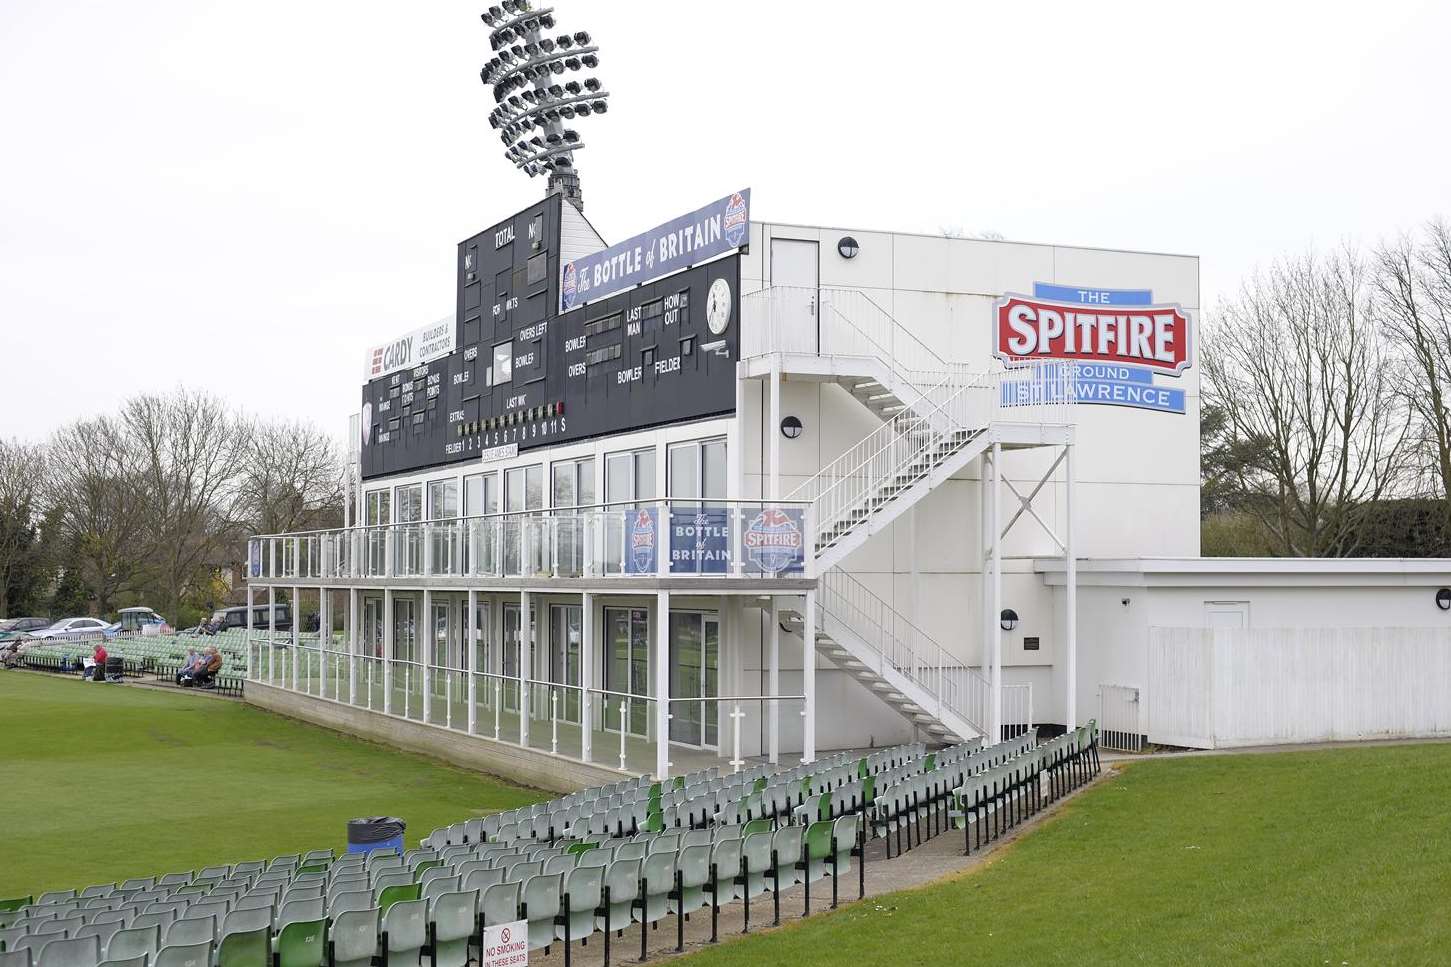 The Spitfire Ground, St Lawrence, Canterbury, where the match will be played